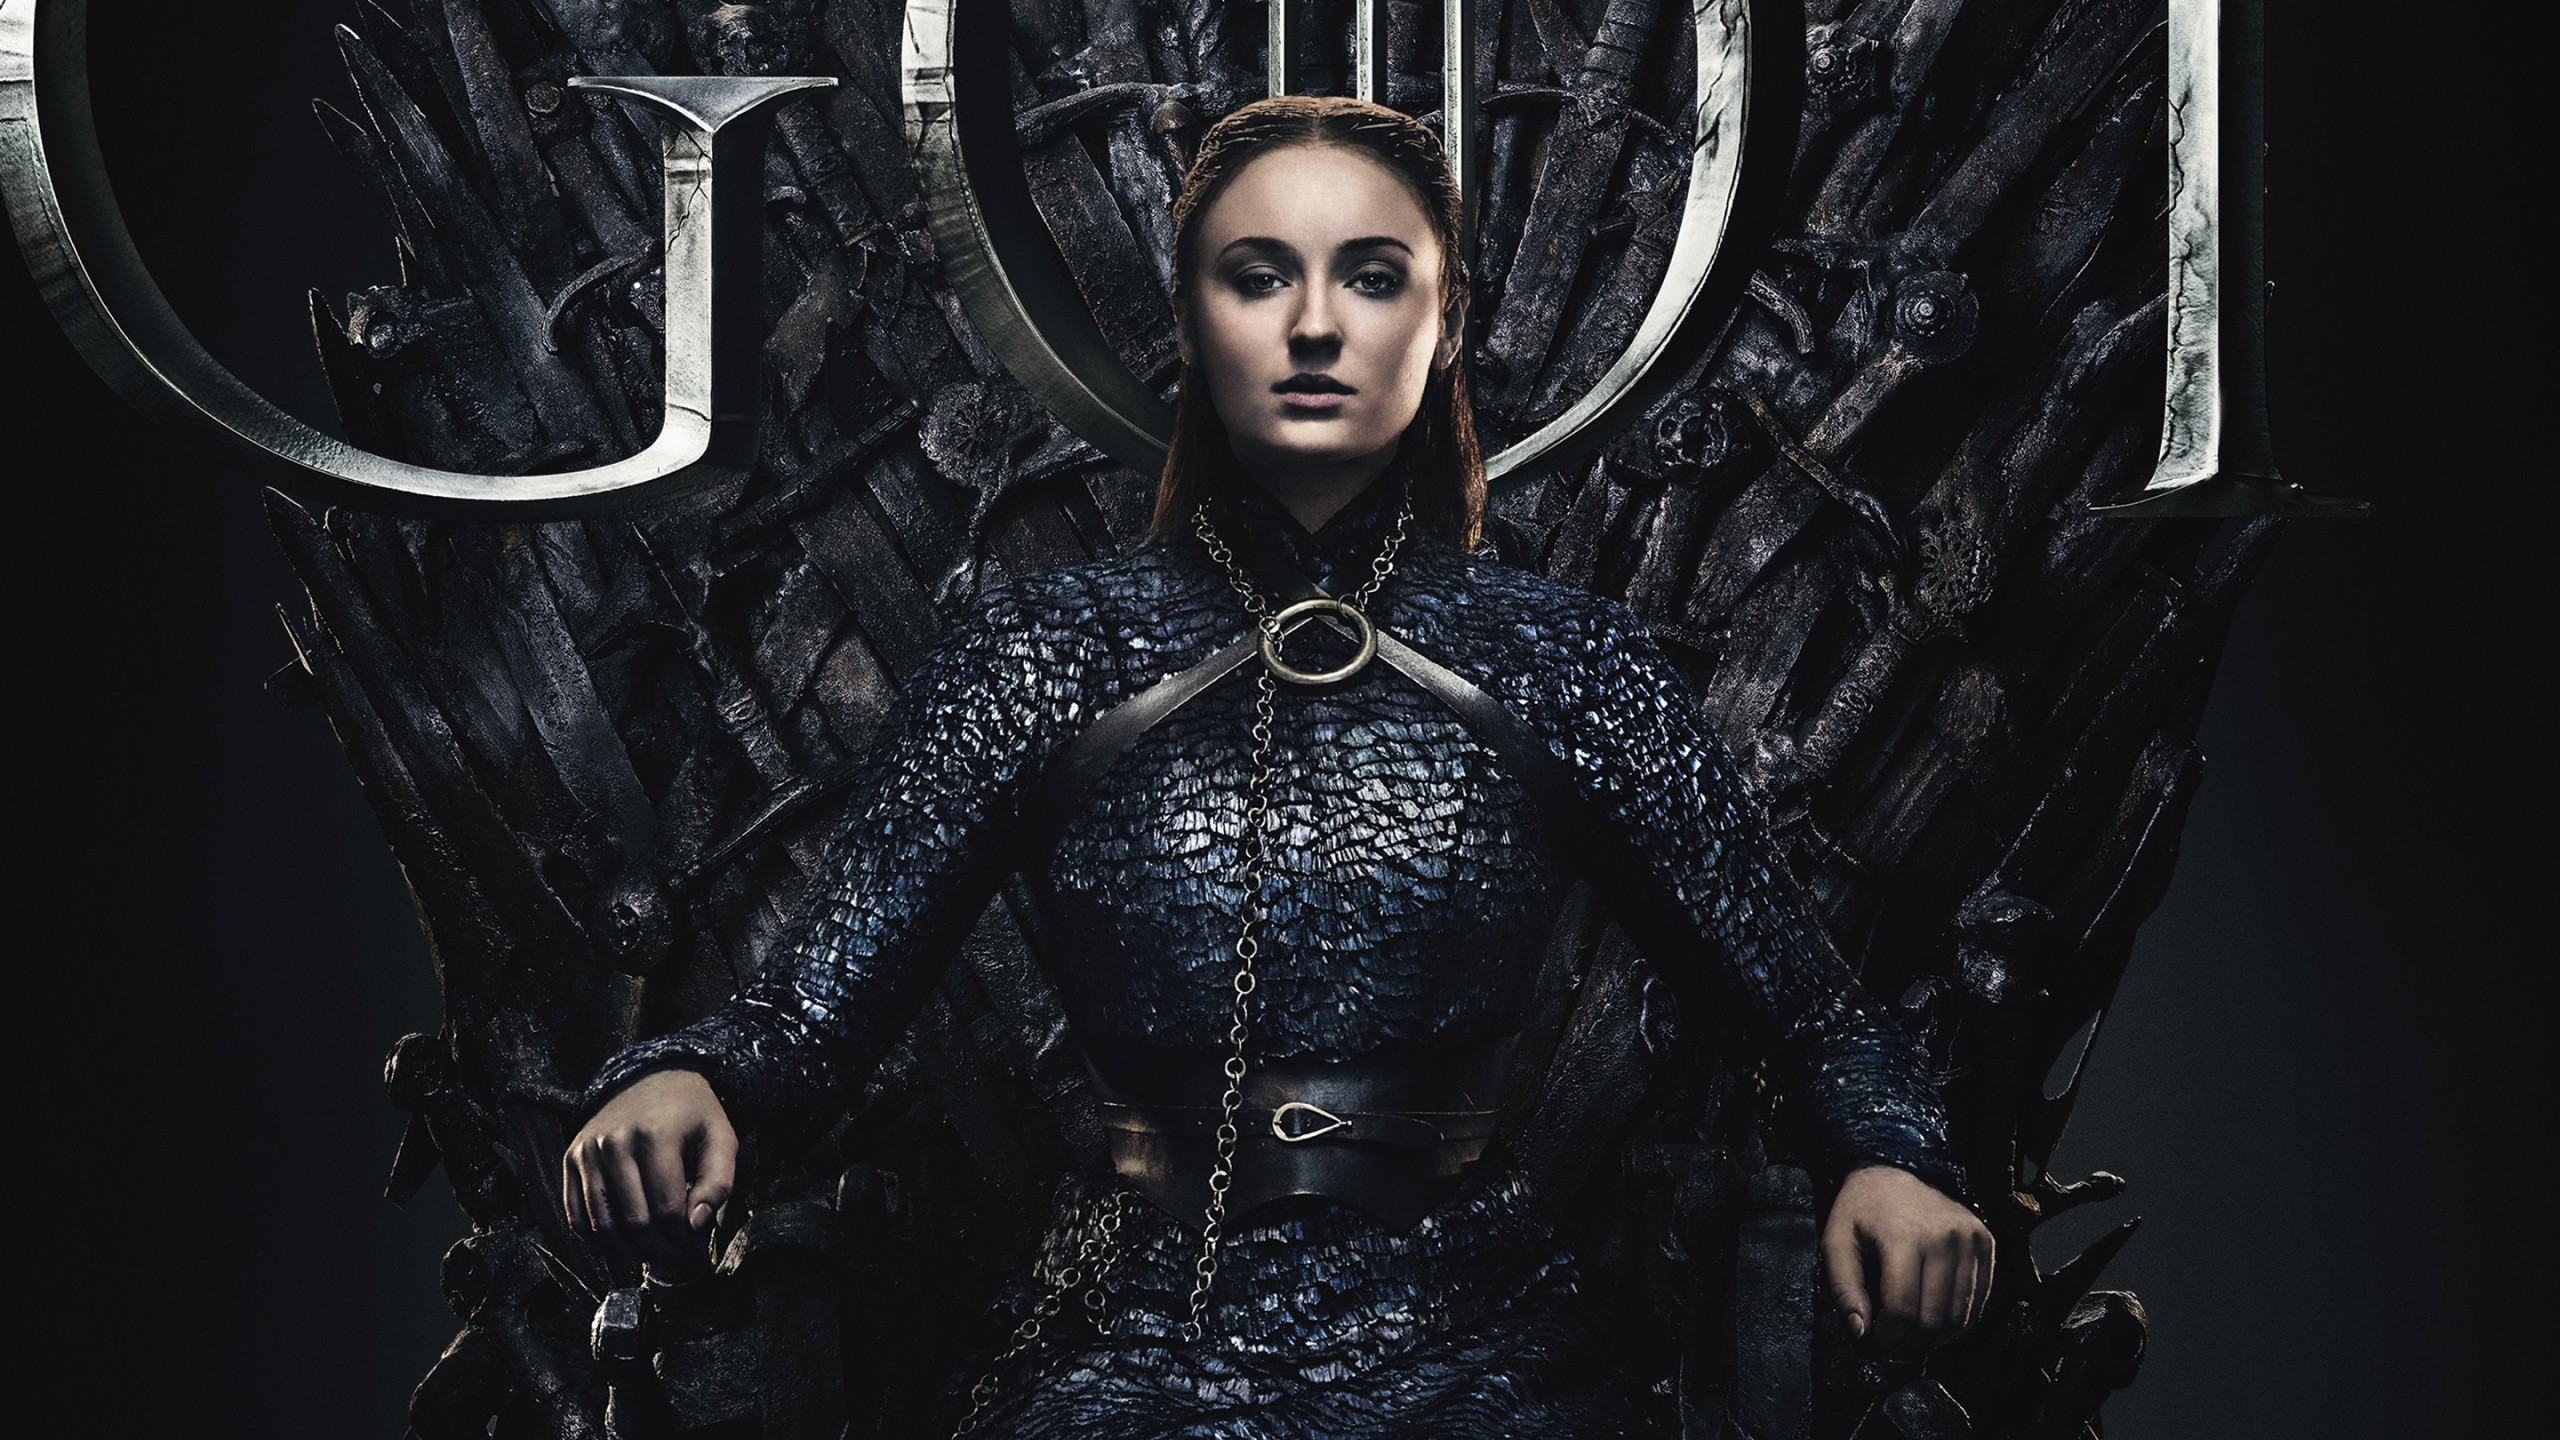 Iphone 6 6s Plus Resolutions - Game Of Thrones Season 8 Throne , HD Wallpaper & Backgrounds